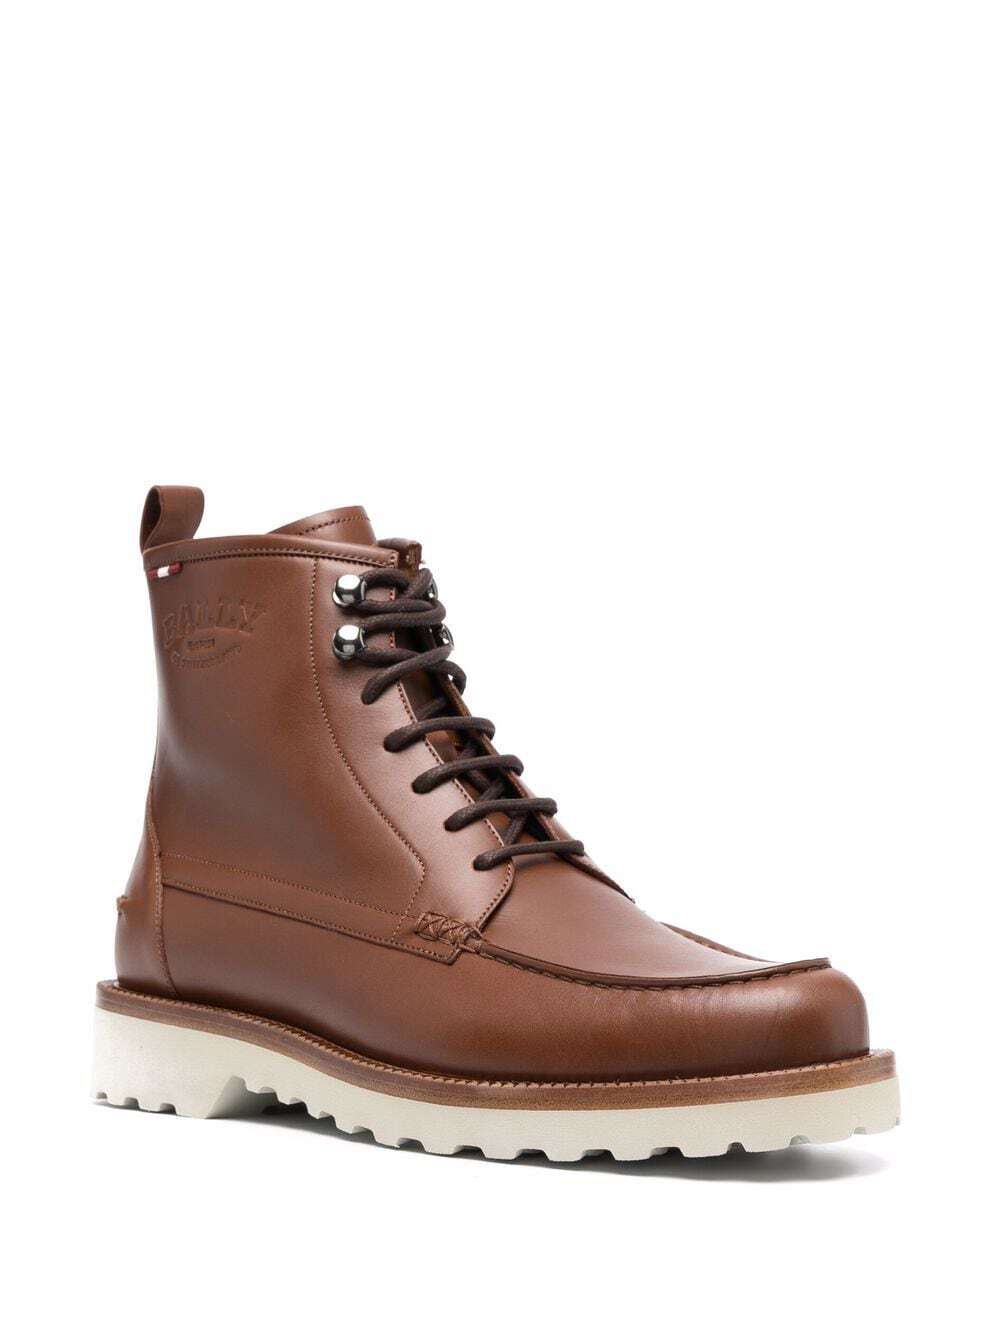 BALLY Nokor Leather Lace-Up Boots Brown